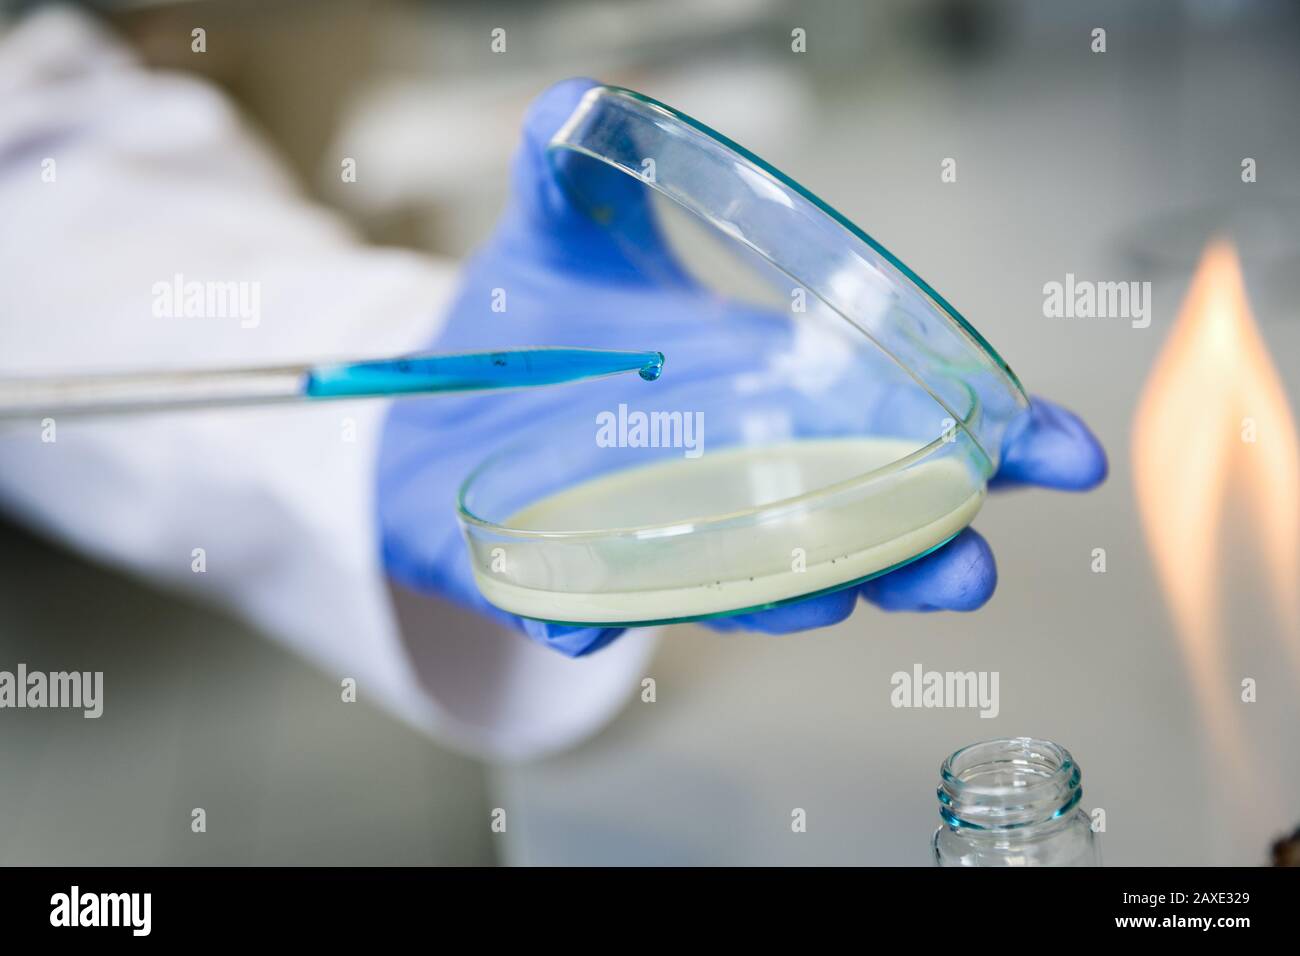 Laboratory assistant analyzes bacterium sample using medical equipment in a bacteriology clinic. Microbiological medical concept Stock Photo